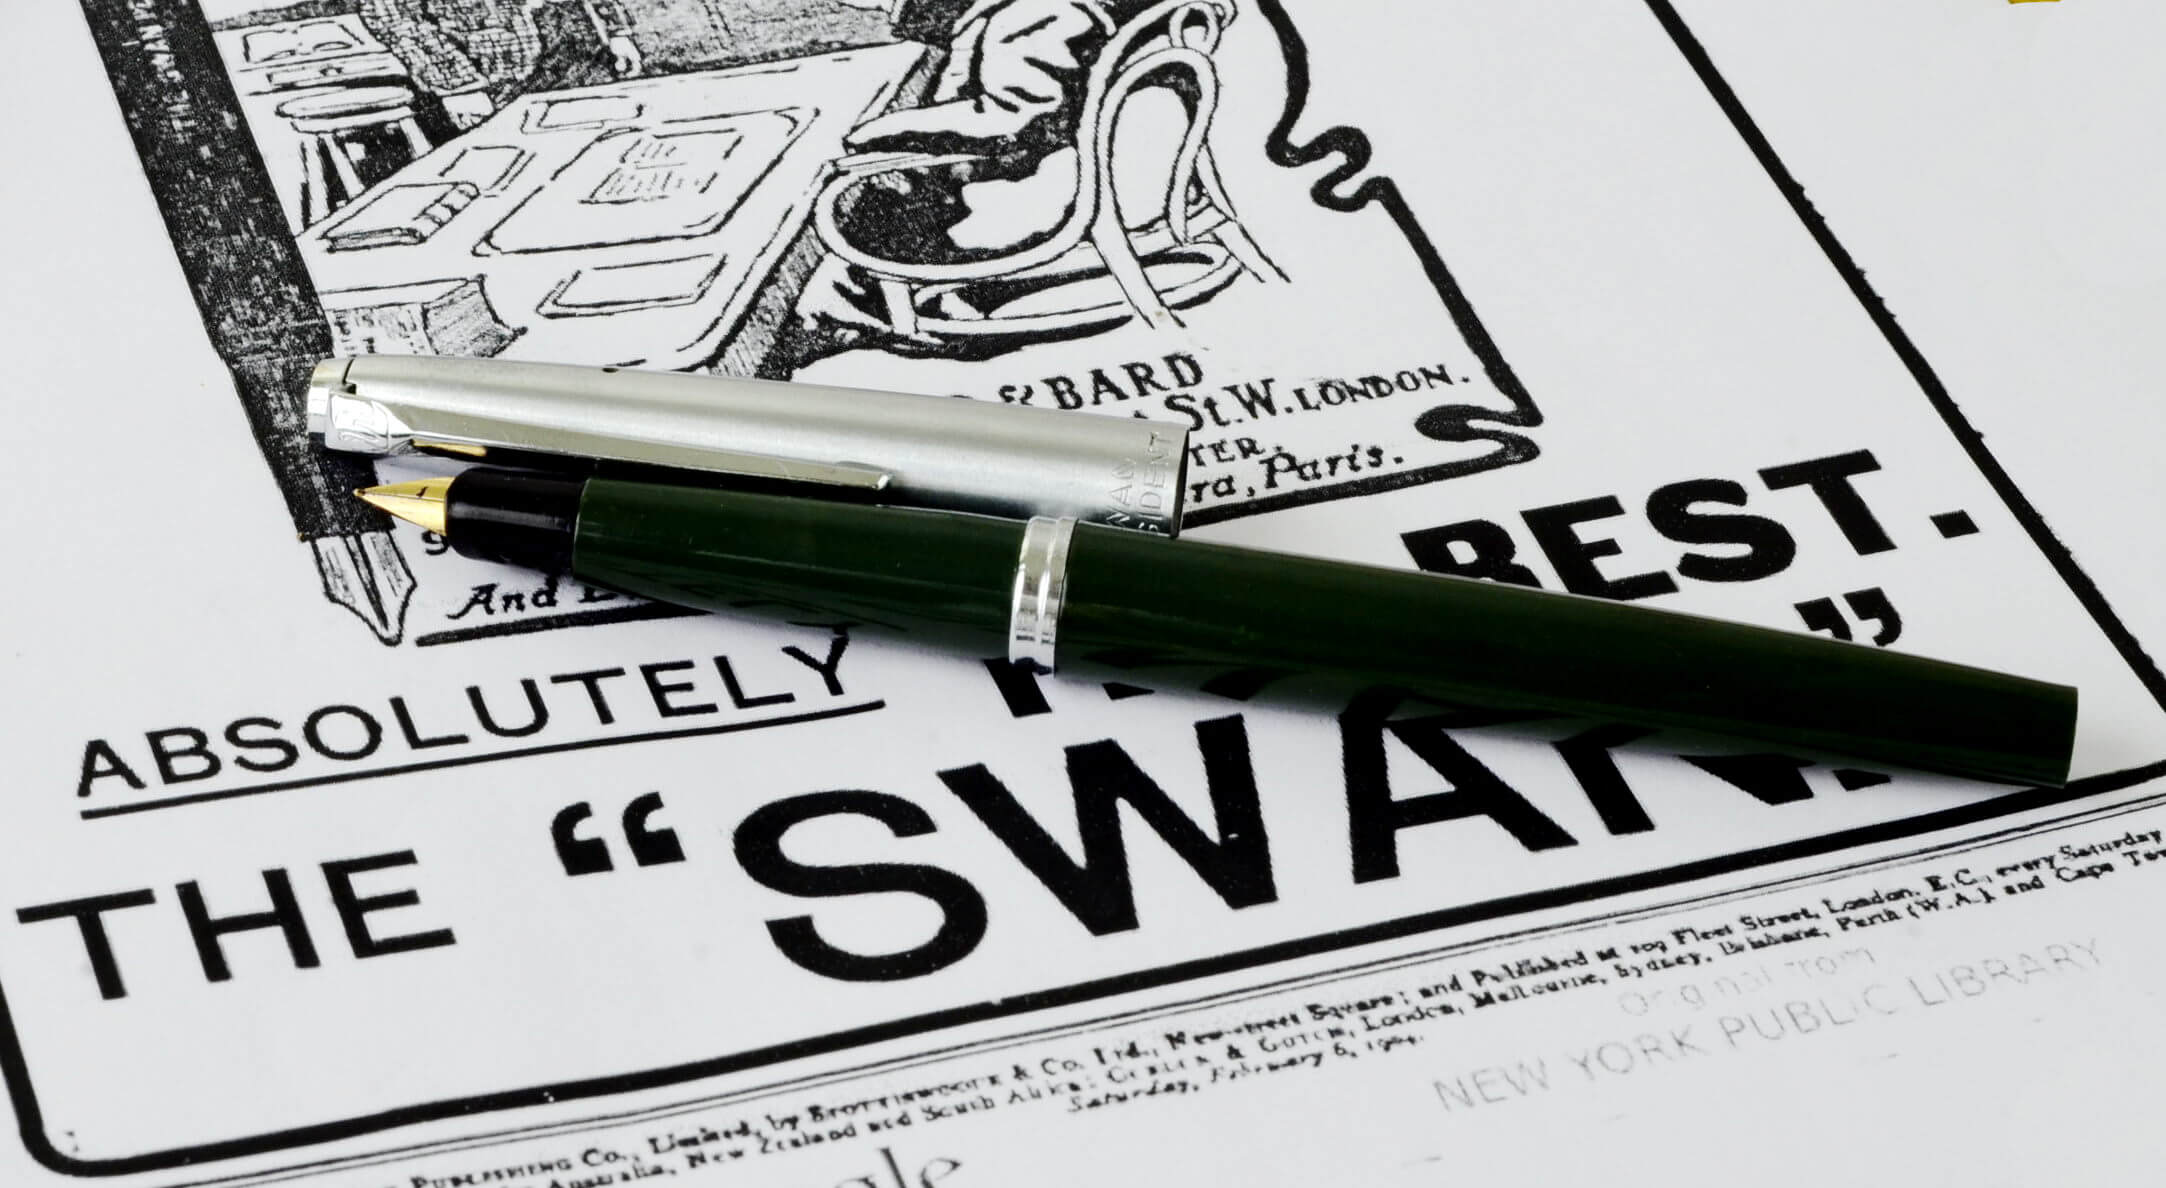 german pen company with red swan logo